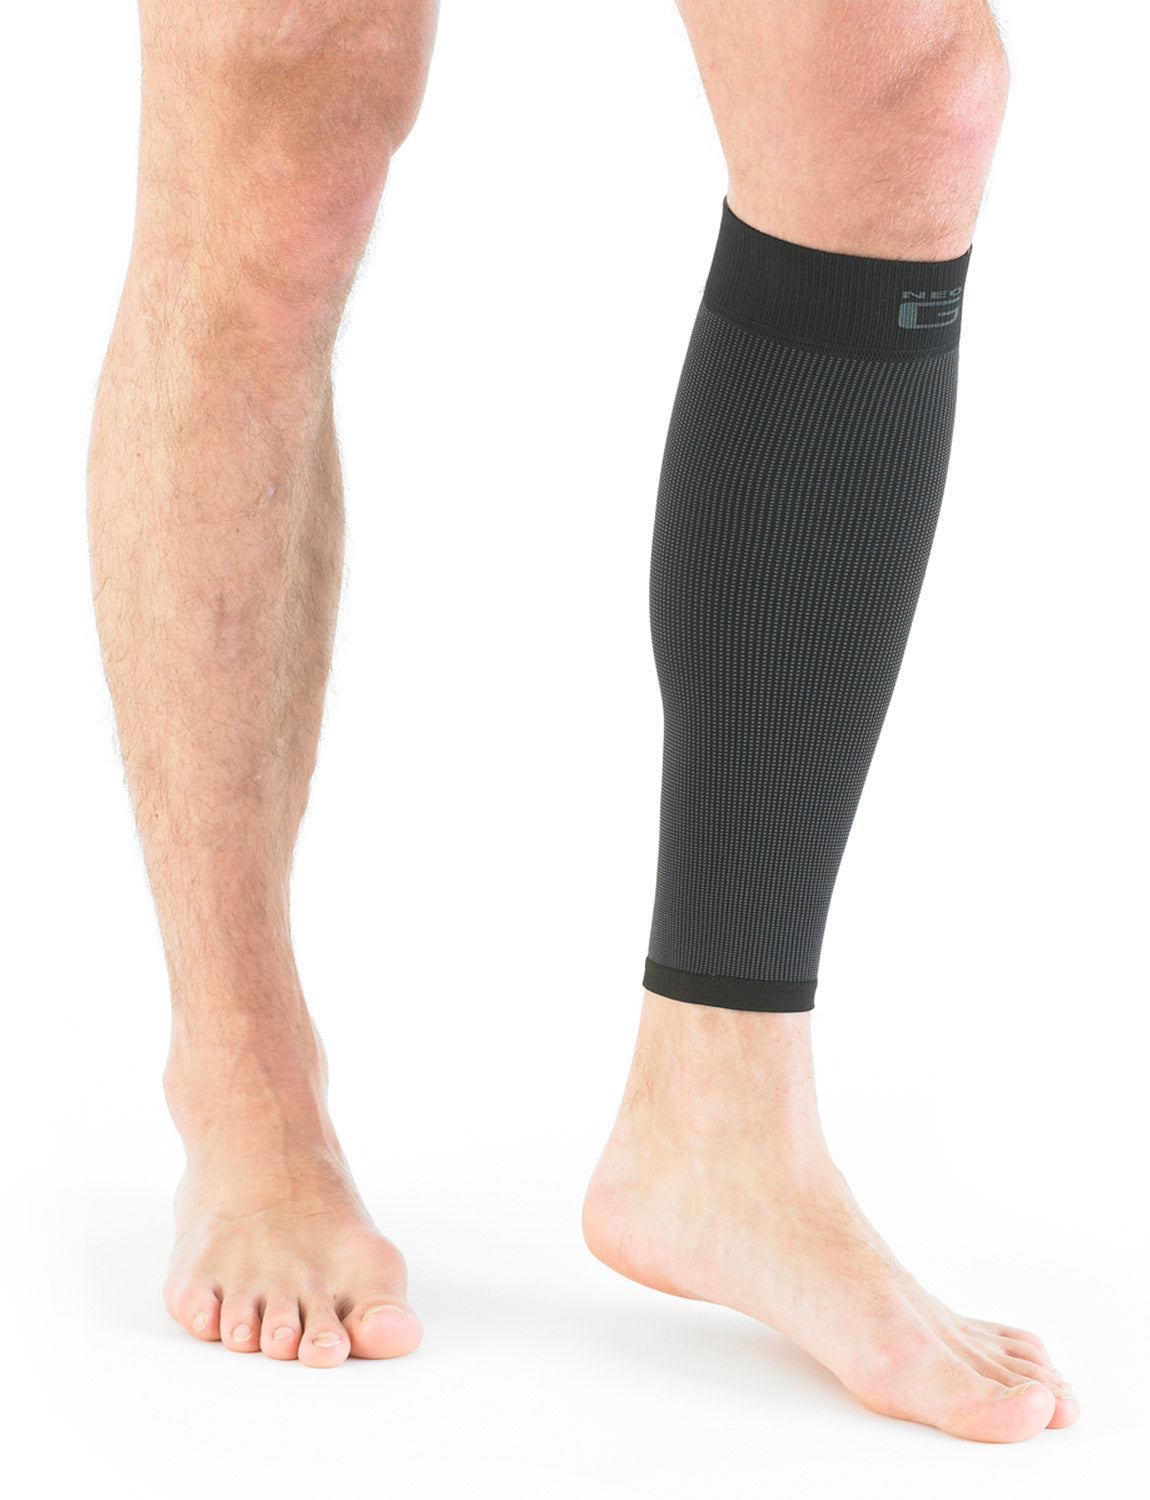 NEO G Calf/Shin Splint Support-Medical Grade Quality, HELPS protect  muscles, shin splints, medial tibial stress syndrome, strains, sprains,  pain